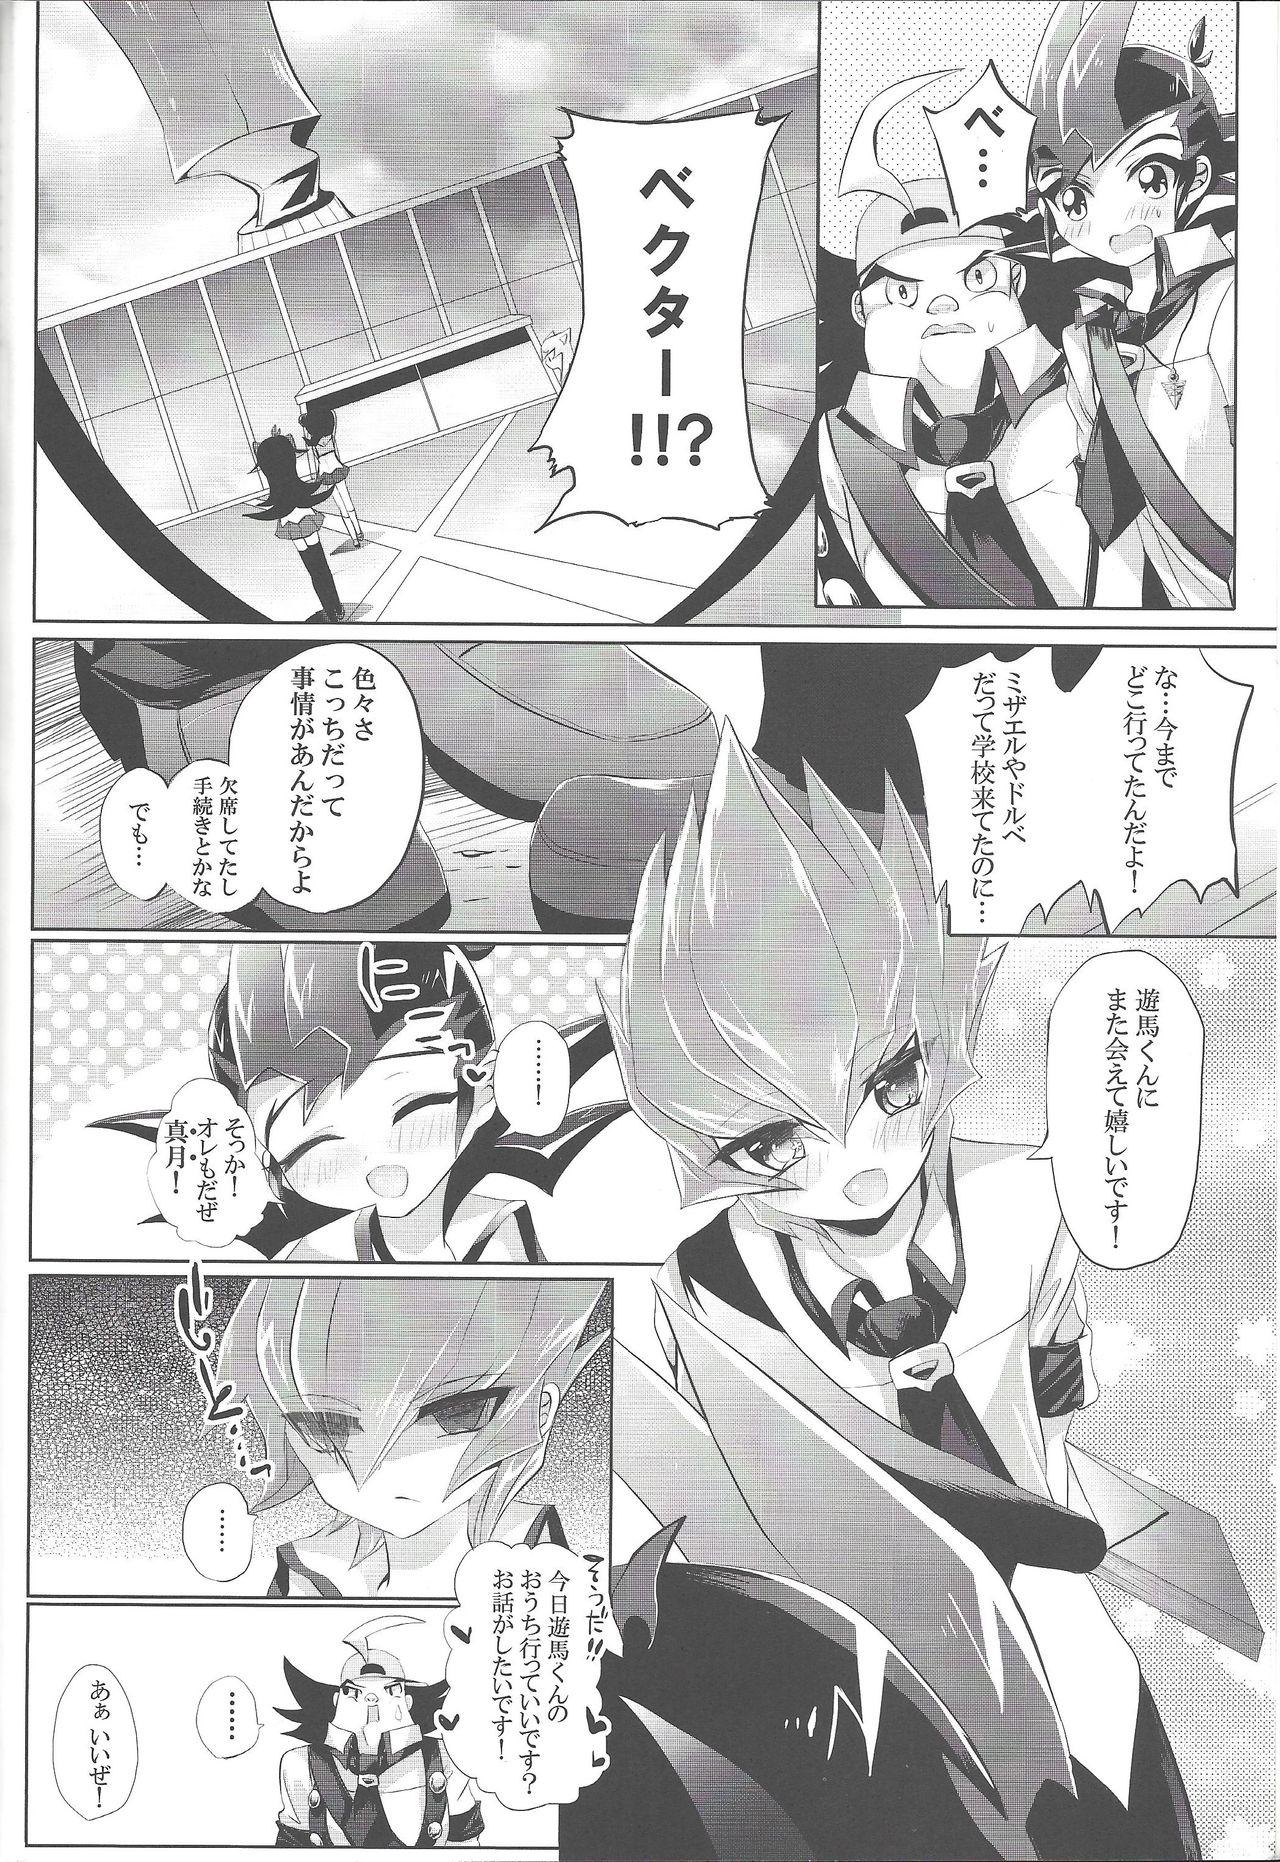 Female Domination PARANOIA! - Yu-gi-oh zexal Students - Page 3